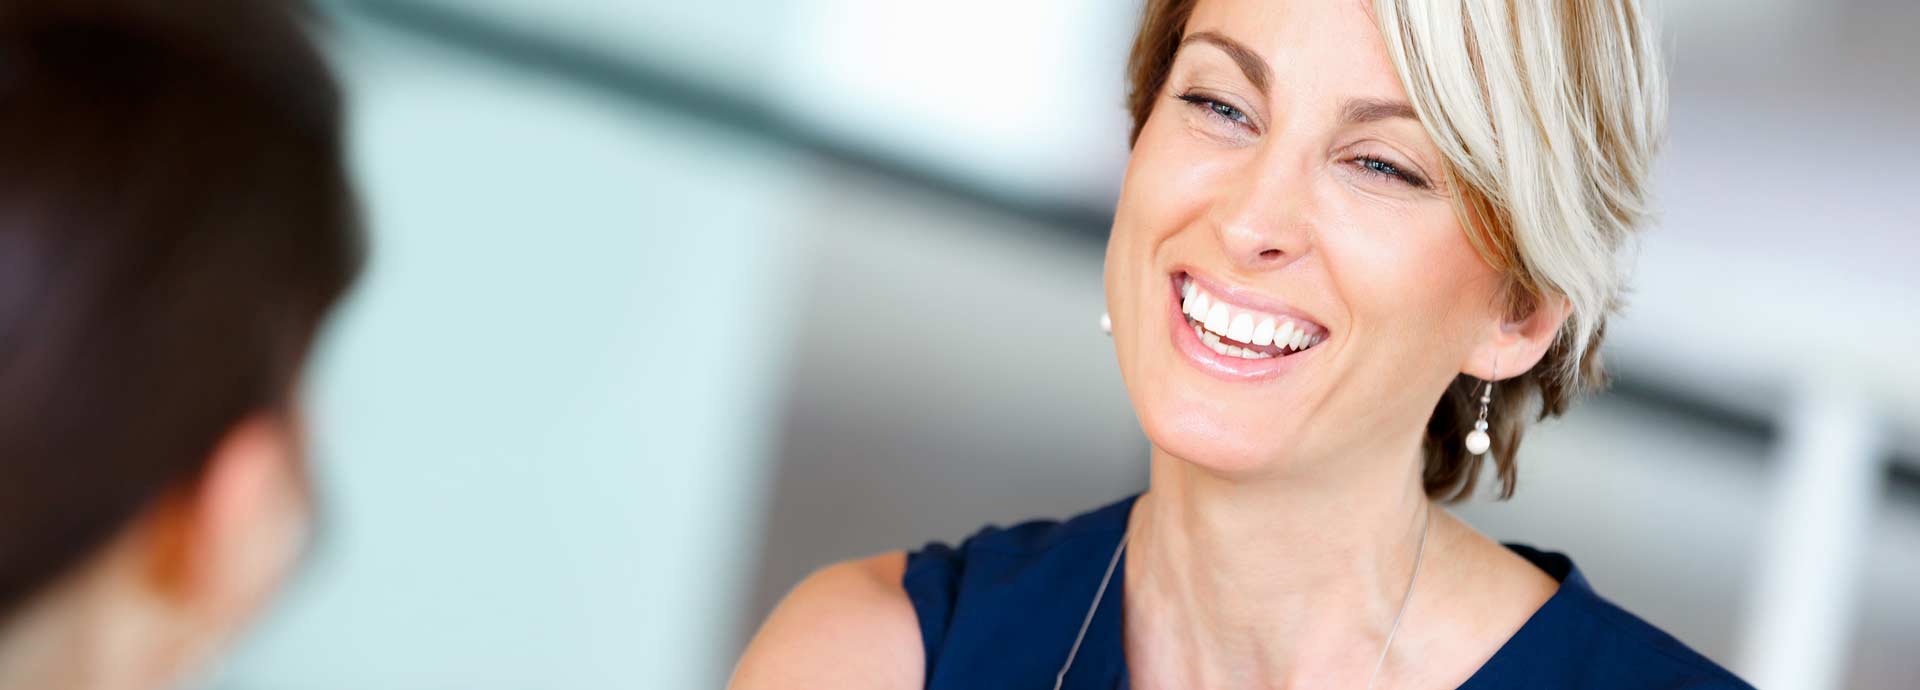 business woman in blue smiling looking at a client